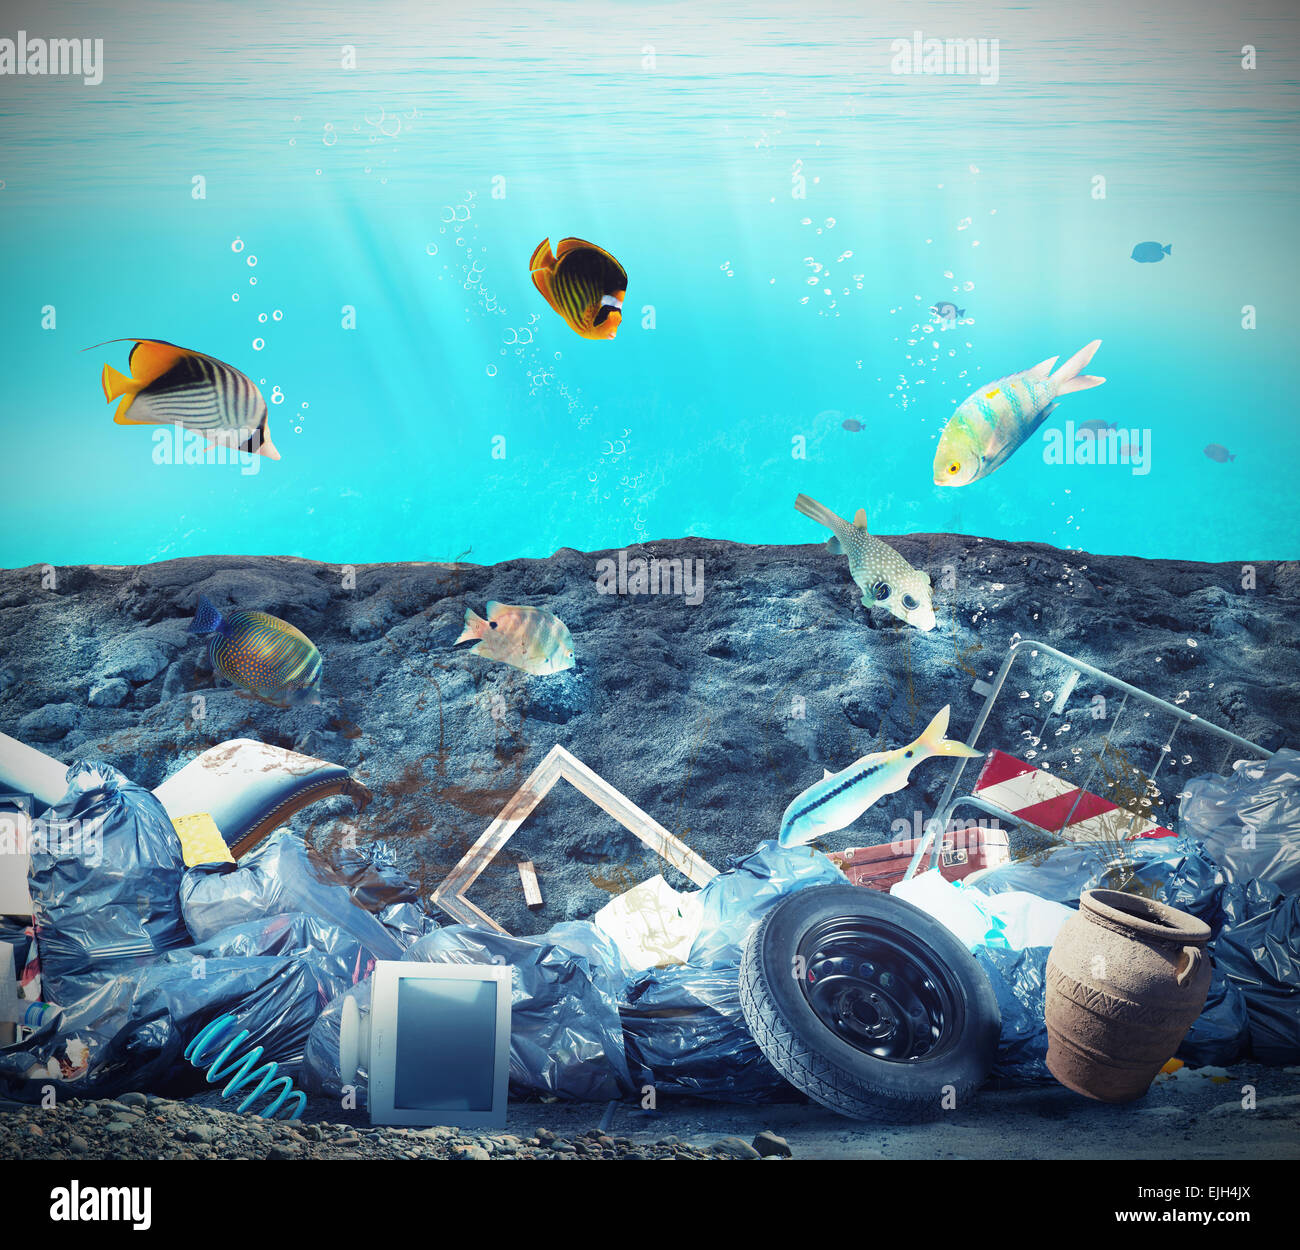 Seabed pollution Stock Photo